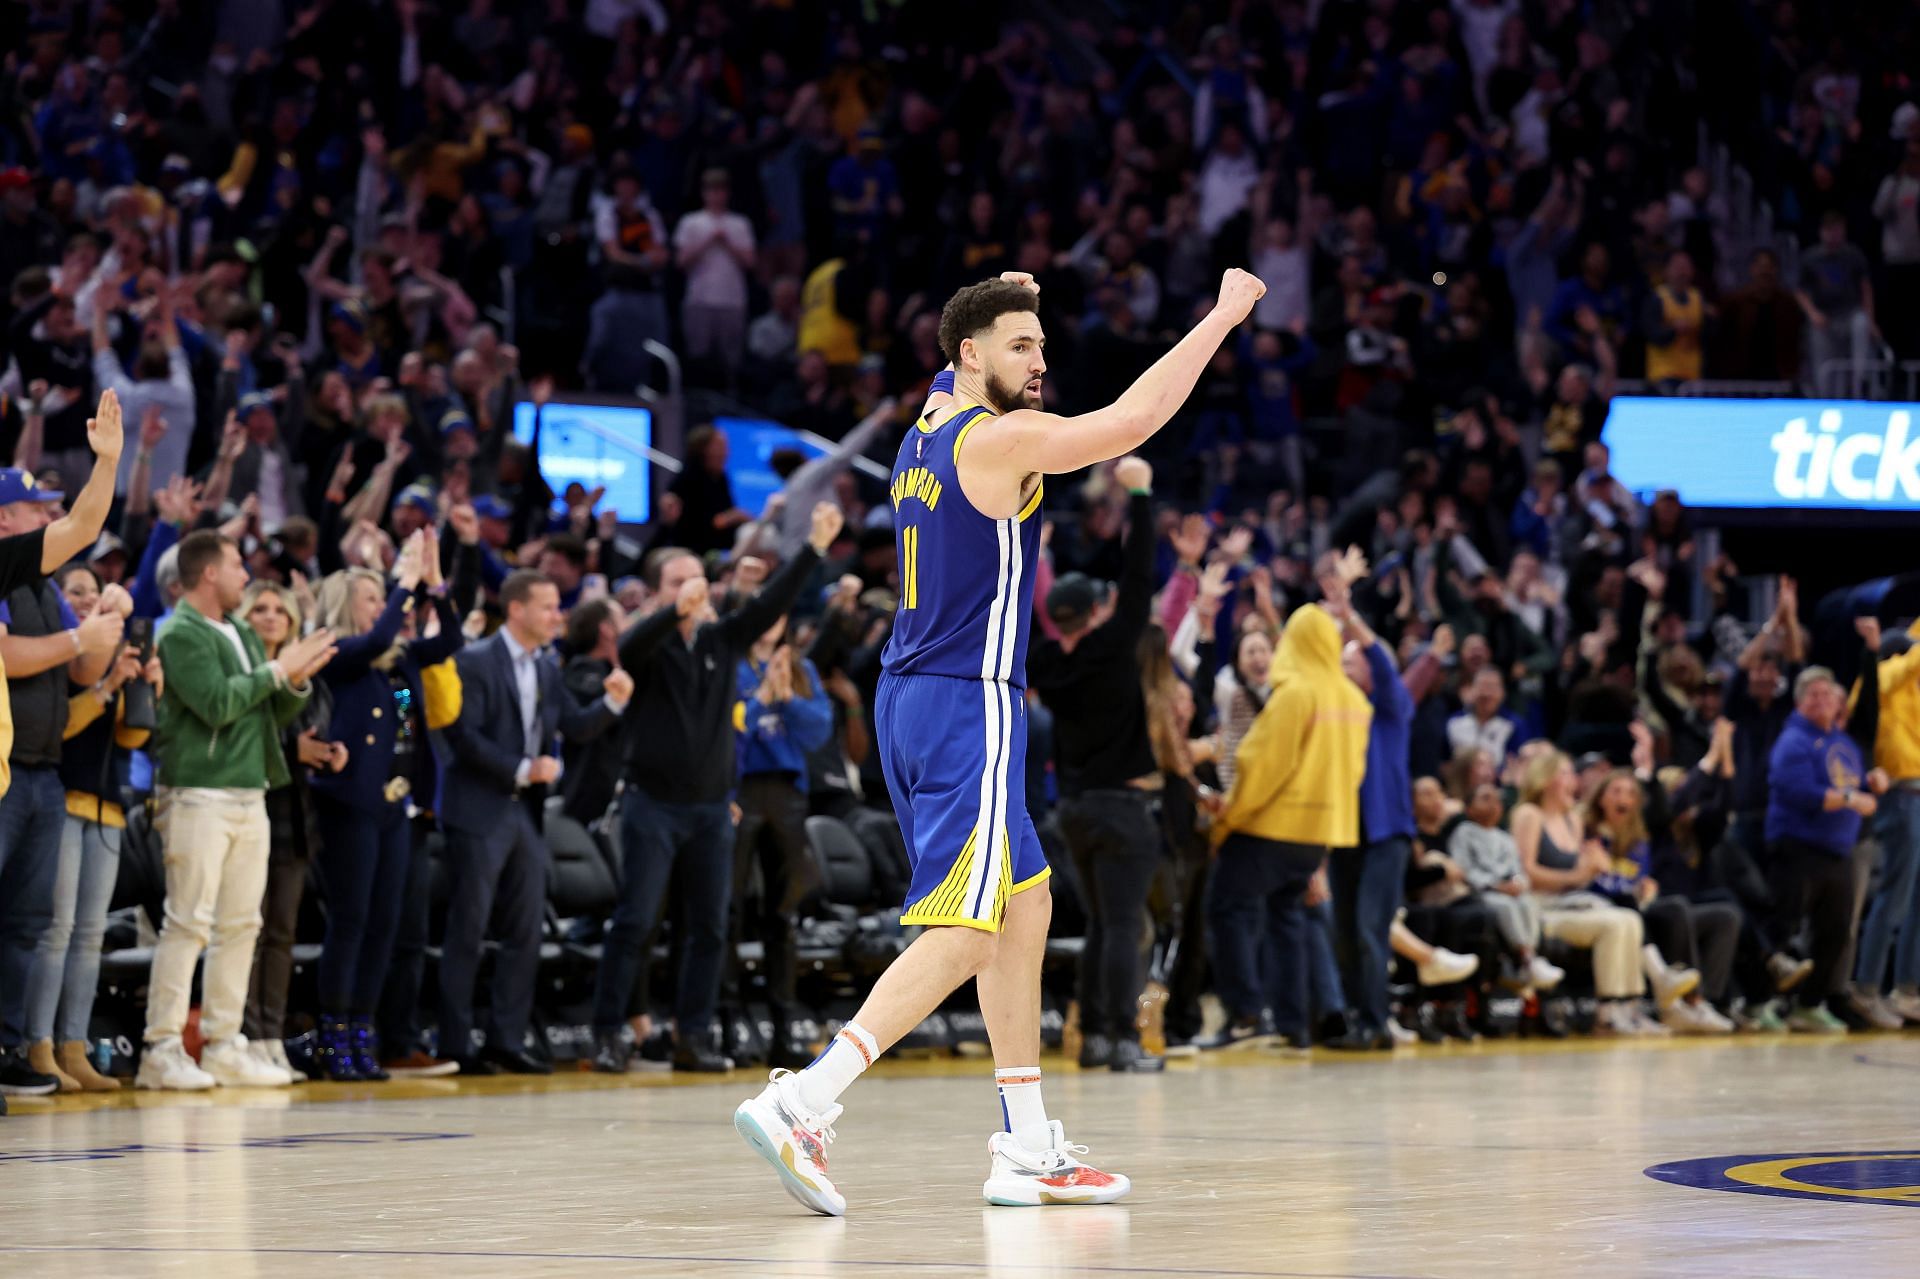 Klay Thompson is expected to play tonight.